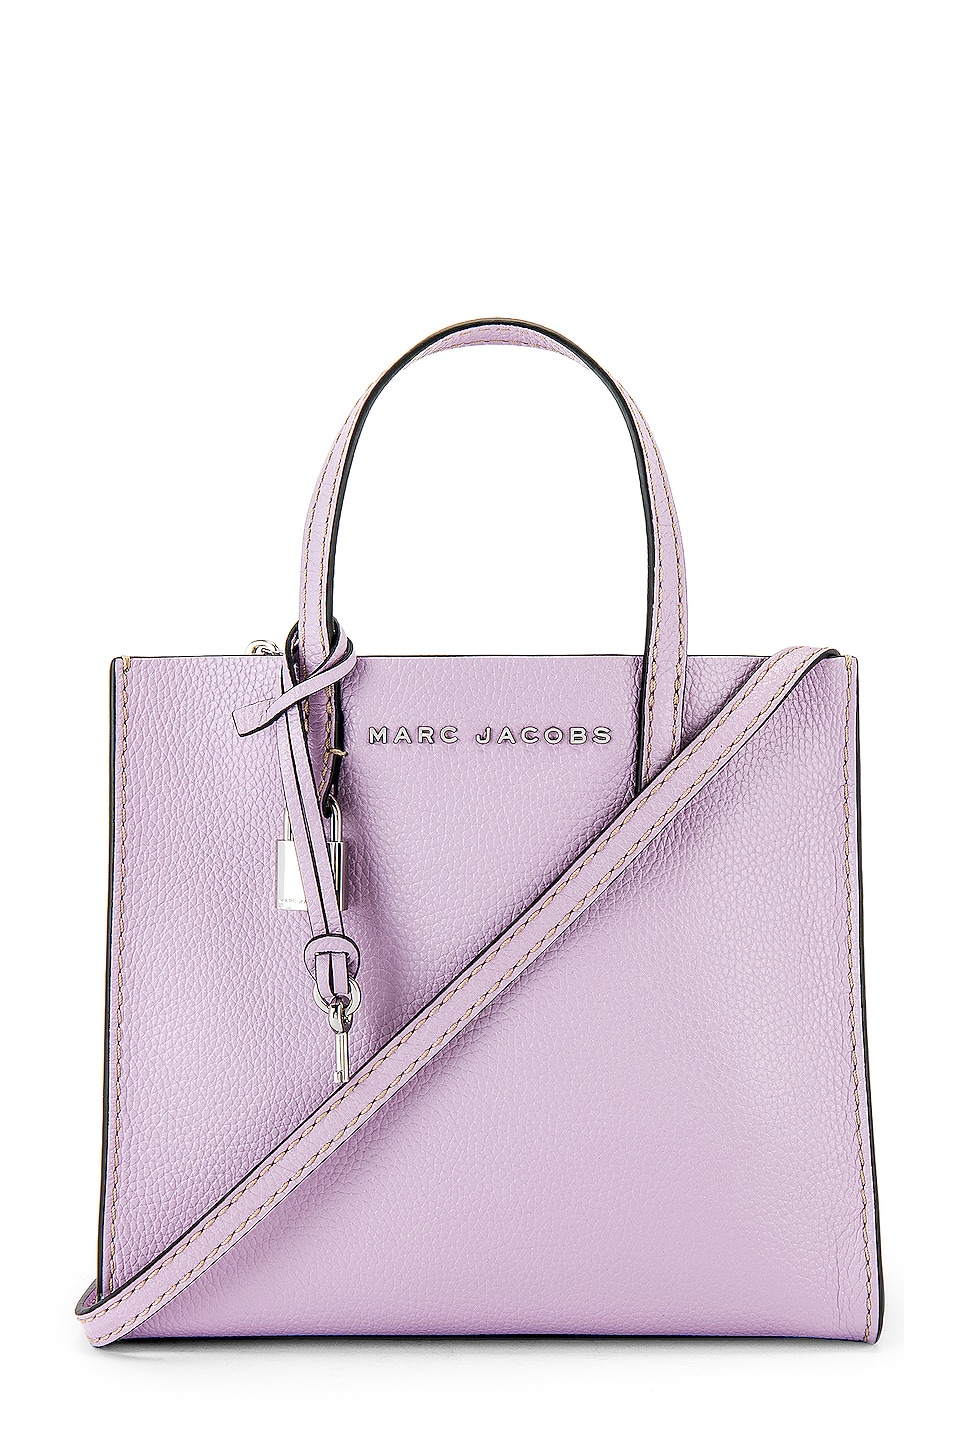 MARC JACOBS MARC JACOBS MINI GRIND TOTE IN PURPLE.,MARJ-WY437